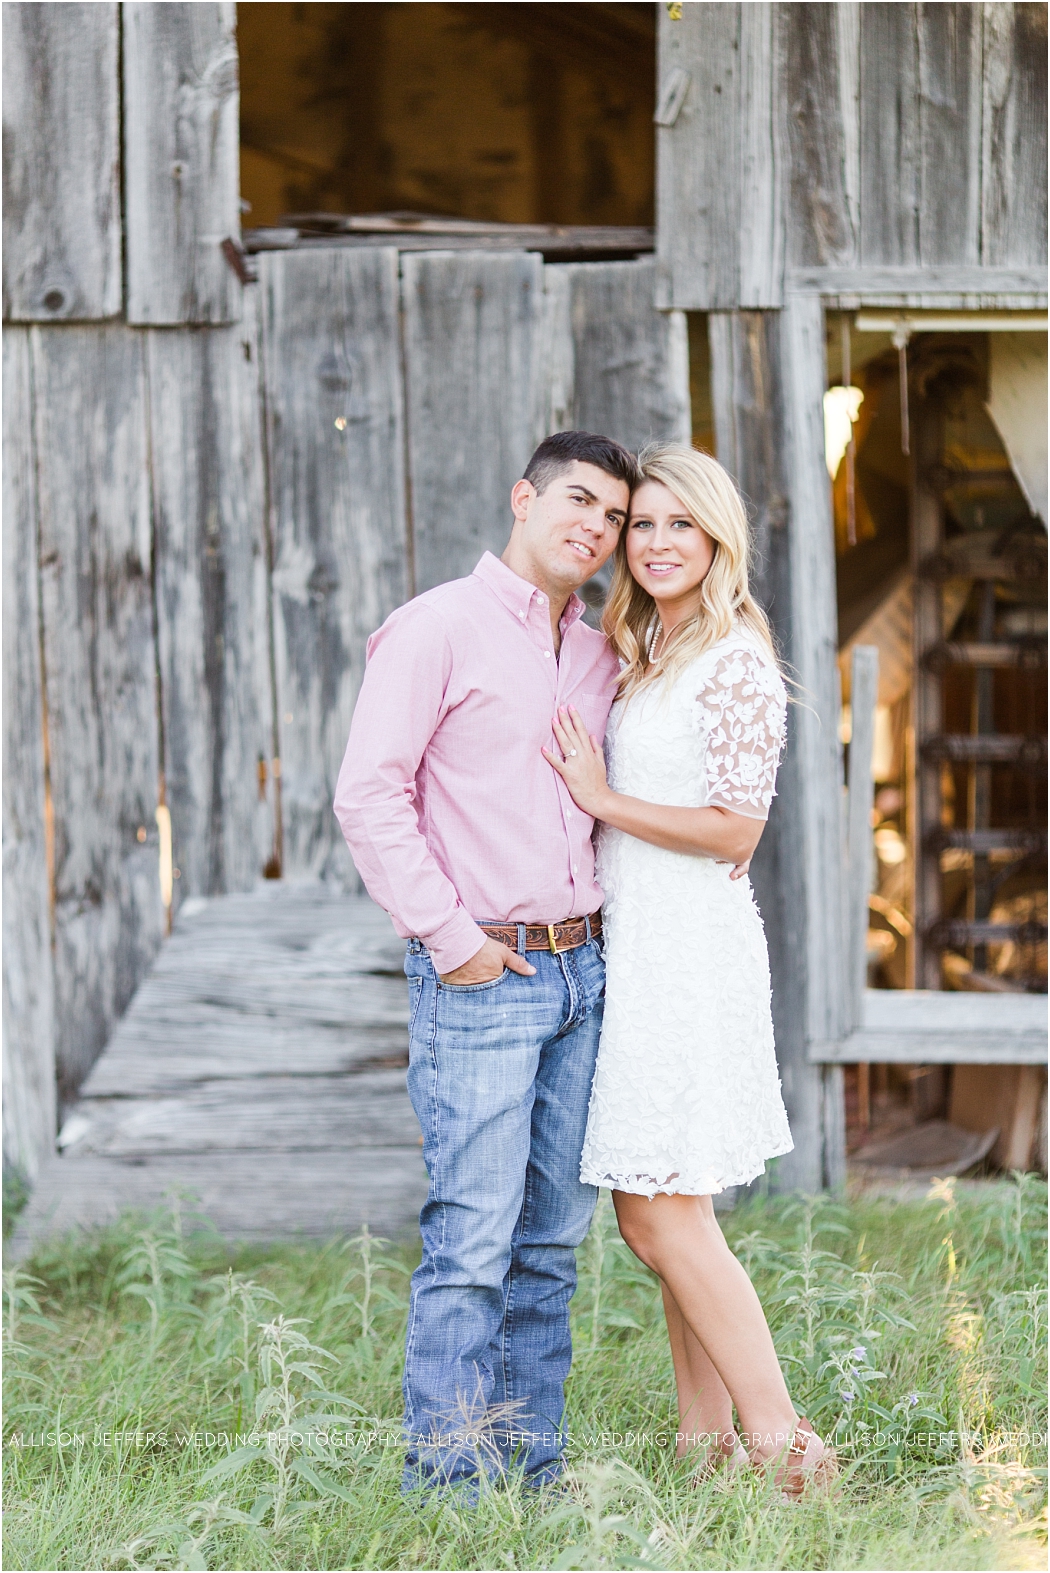 Boerne Texas Hill Country Engagement Session With Pet Dog_0022